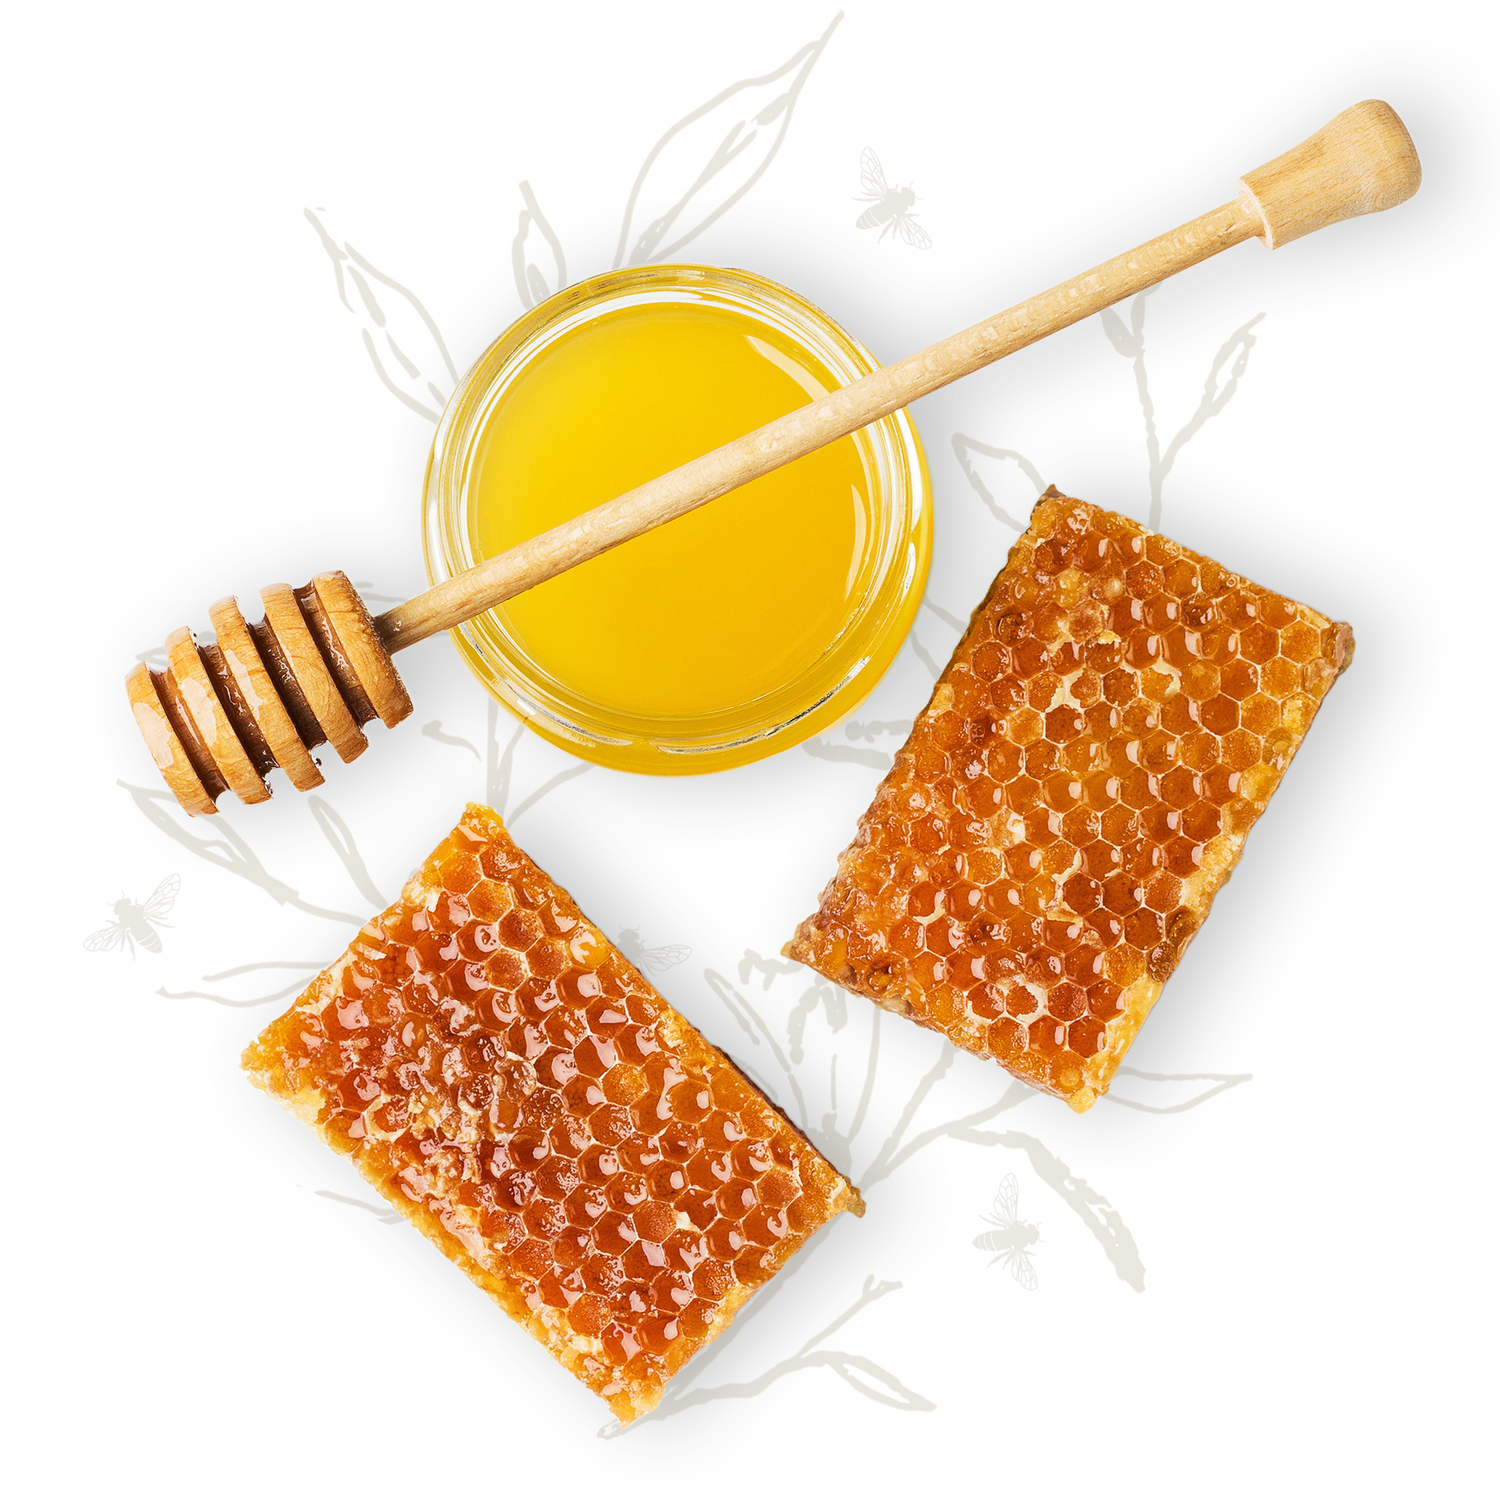 Two honeycombs and a cup of honey